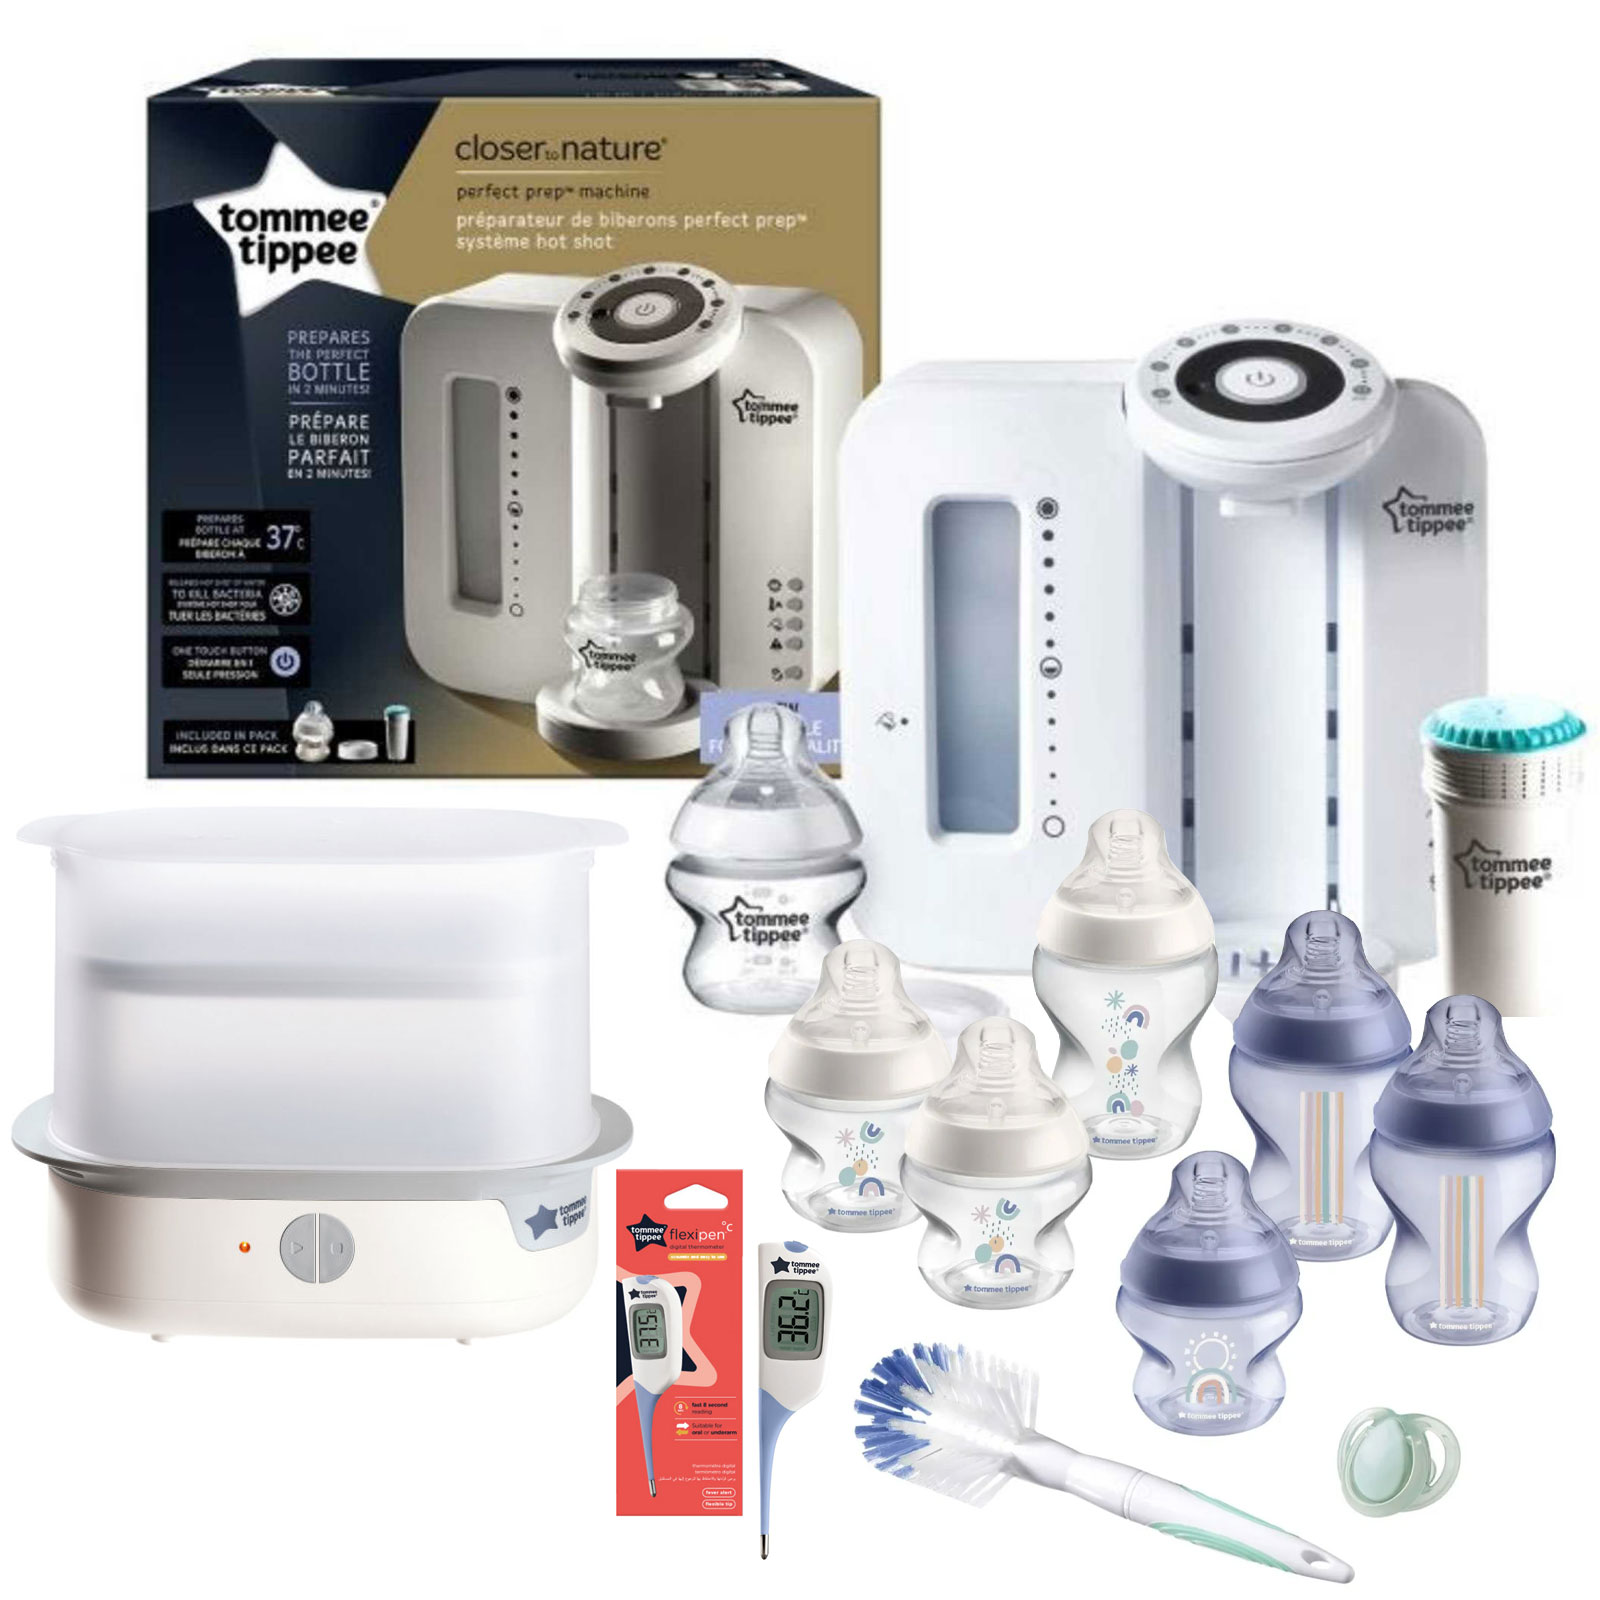 Tommee Tippee 12pc Perfect Prep Machine Electric Steriliser Anti-Colic Baby Bottle Feeding Bundle With Thermometer - White / Blue